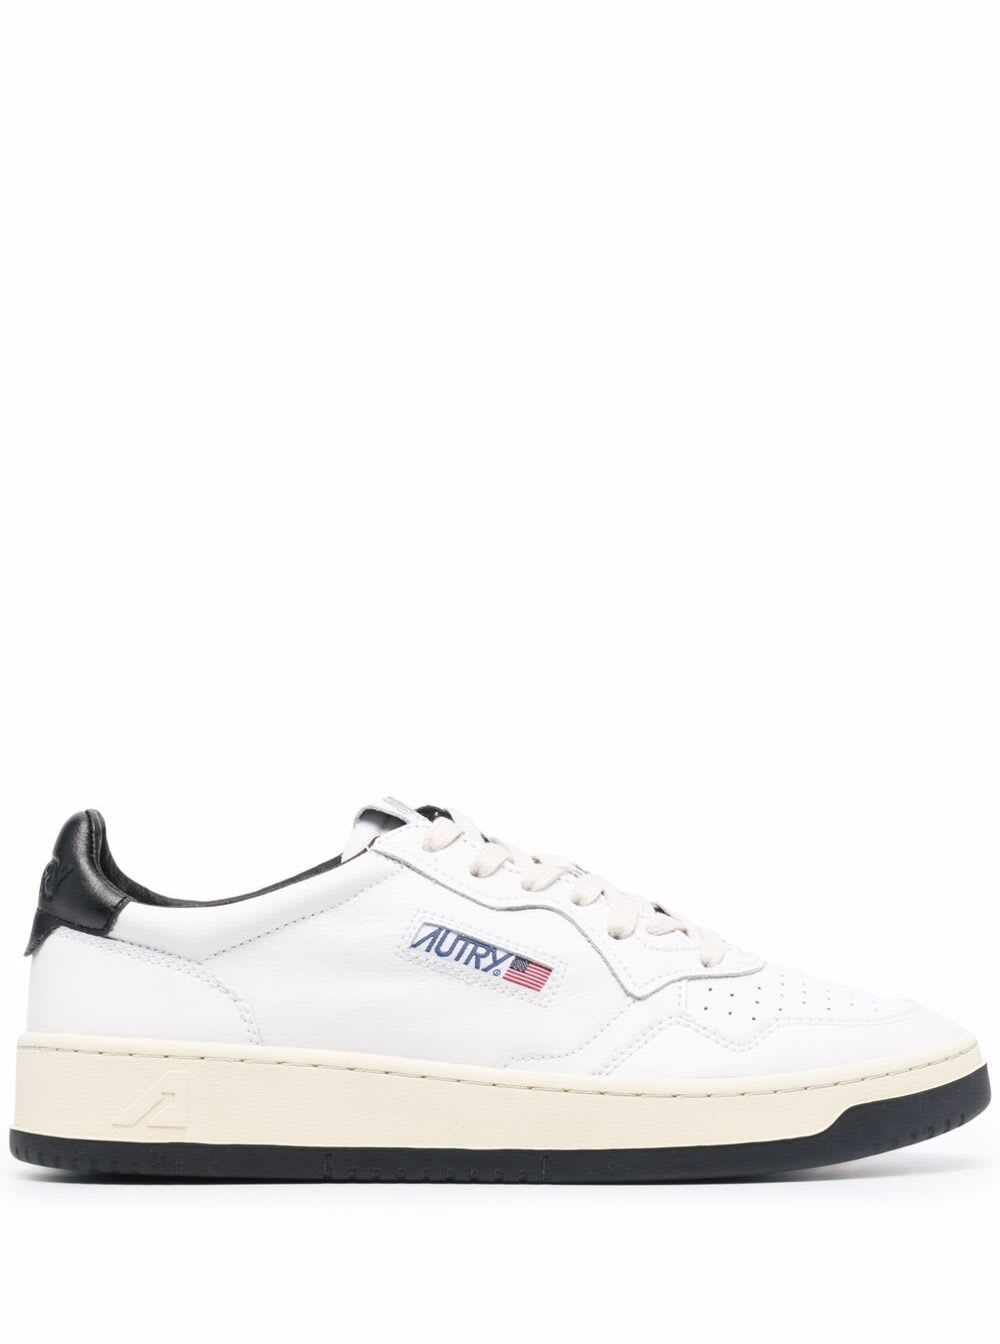 Autry White And Black Leather Sneakers With Logo